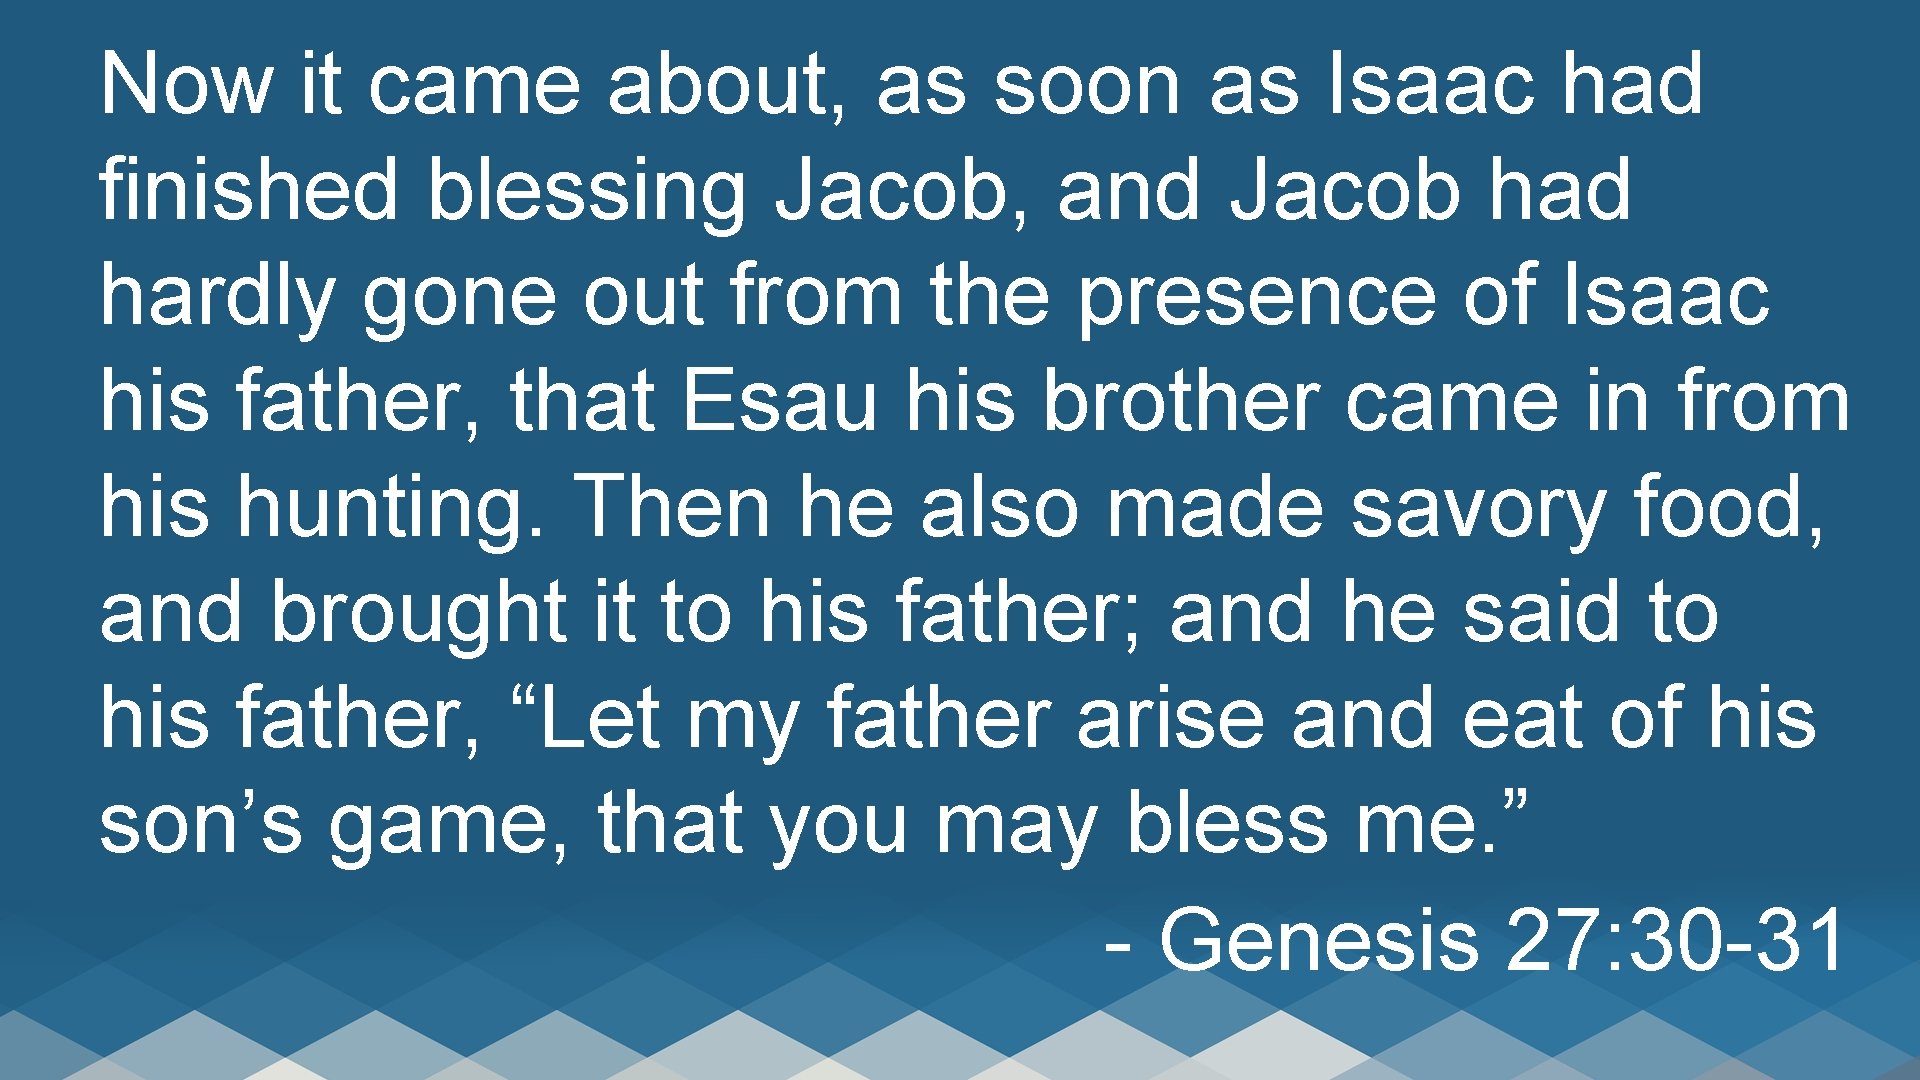 Now it came about, as soon as Isaac had finished blessing Jacob, and Jacob